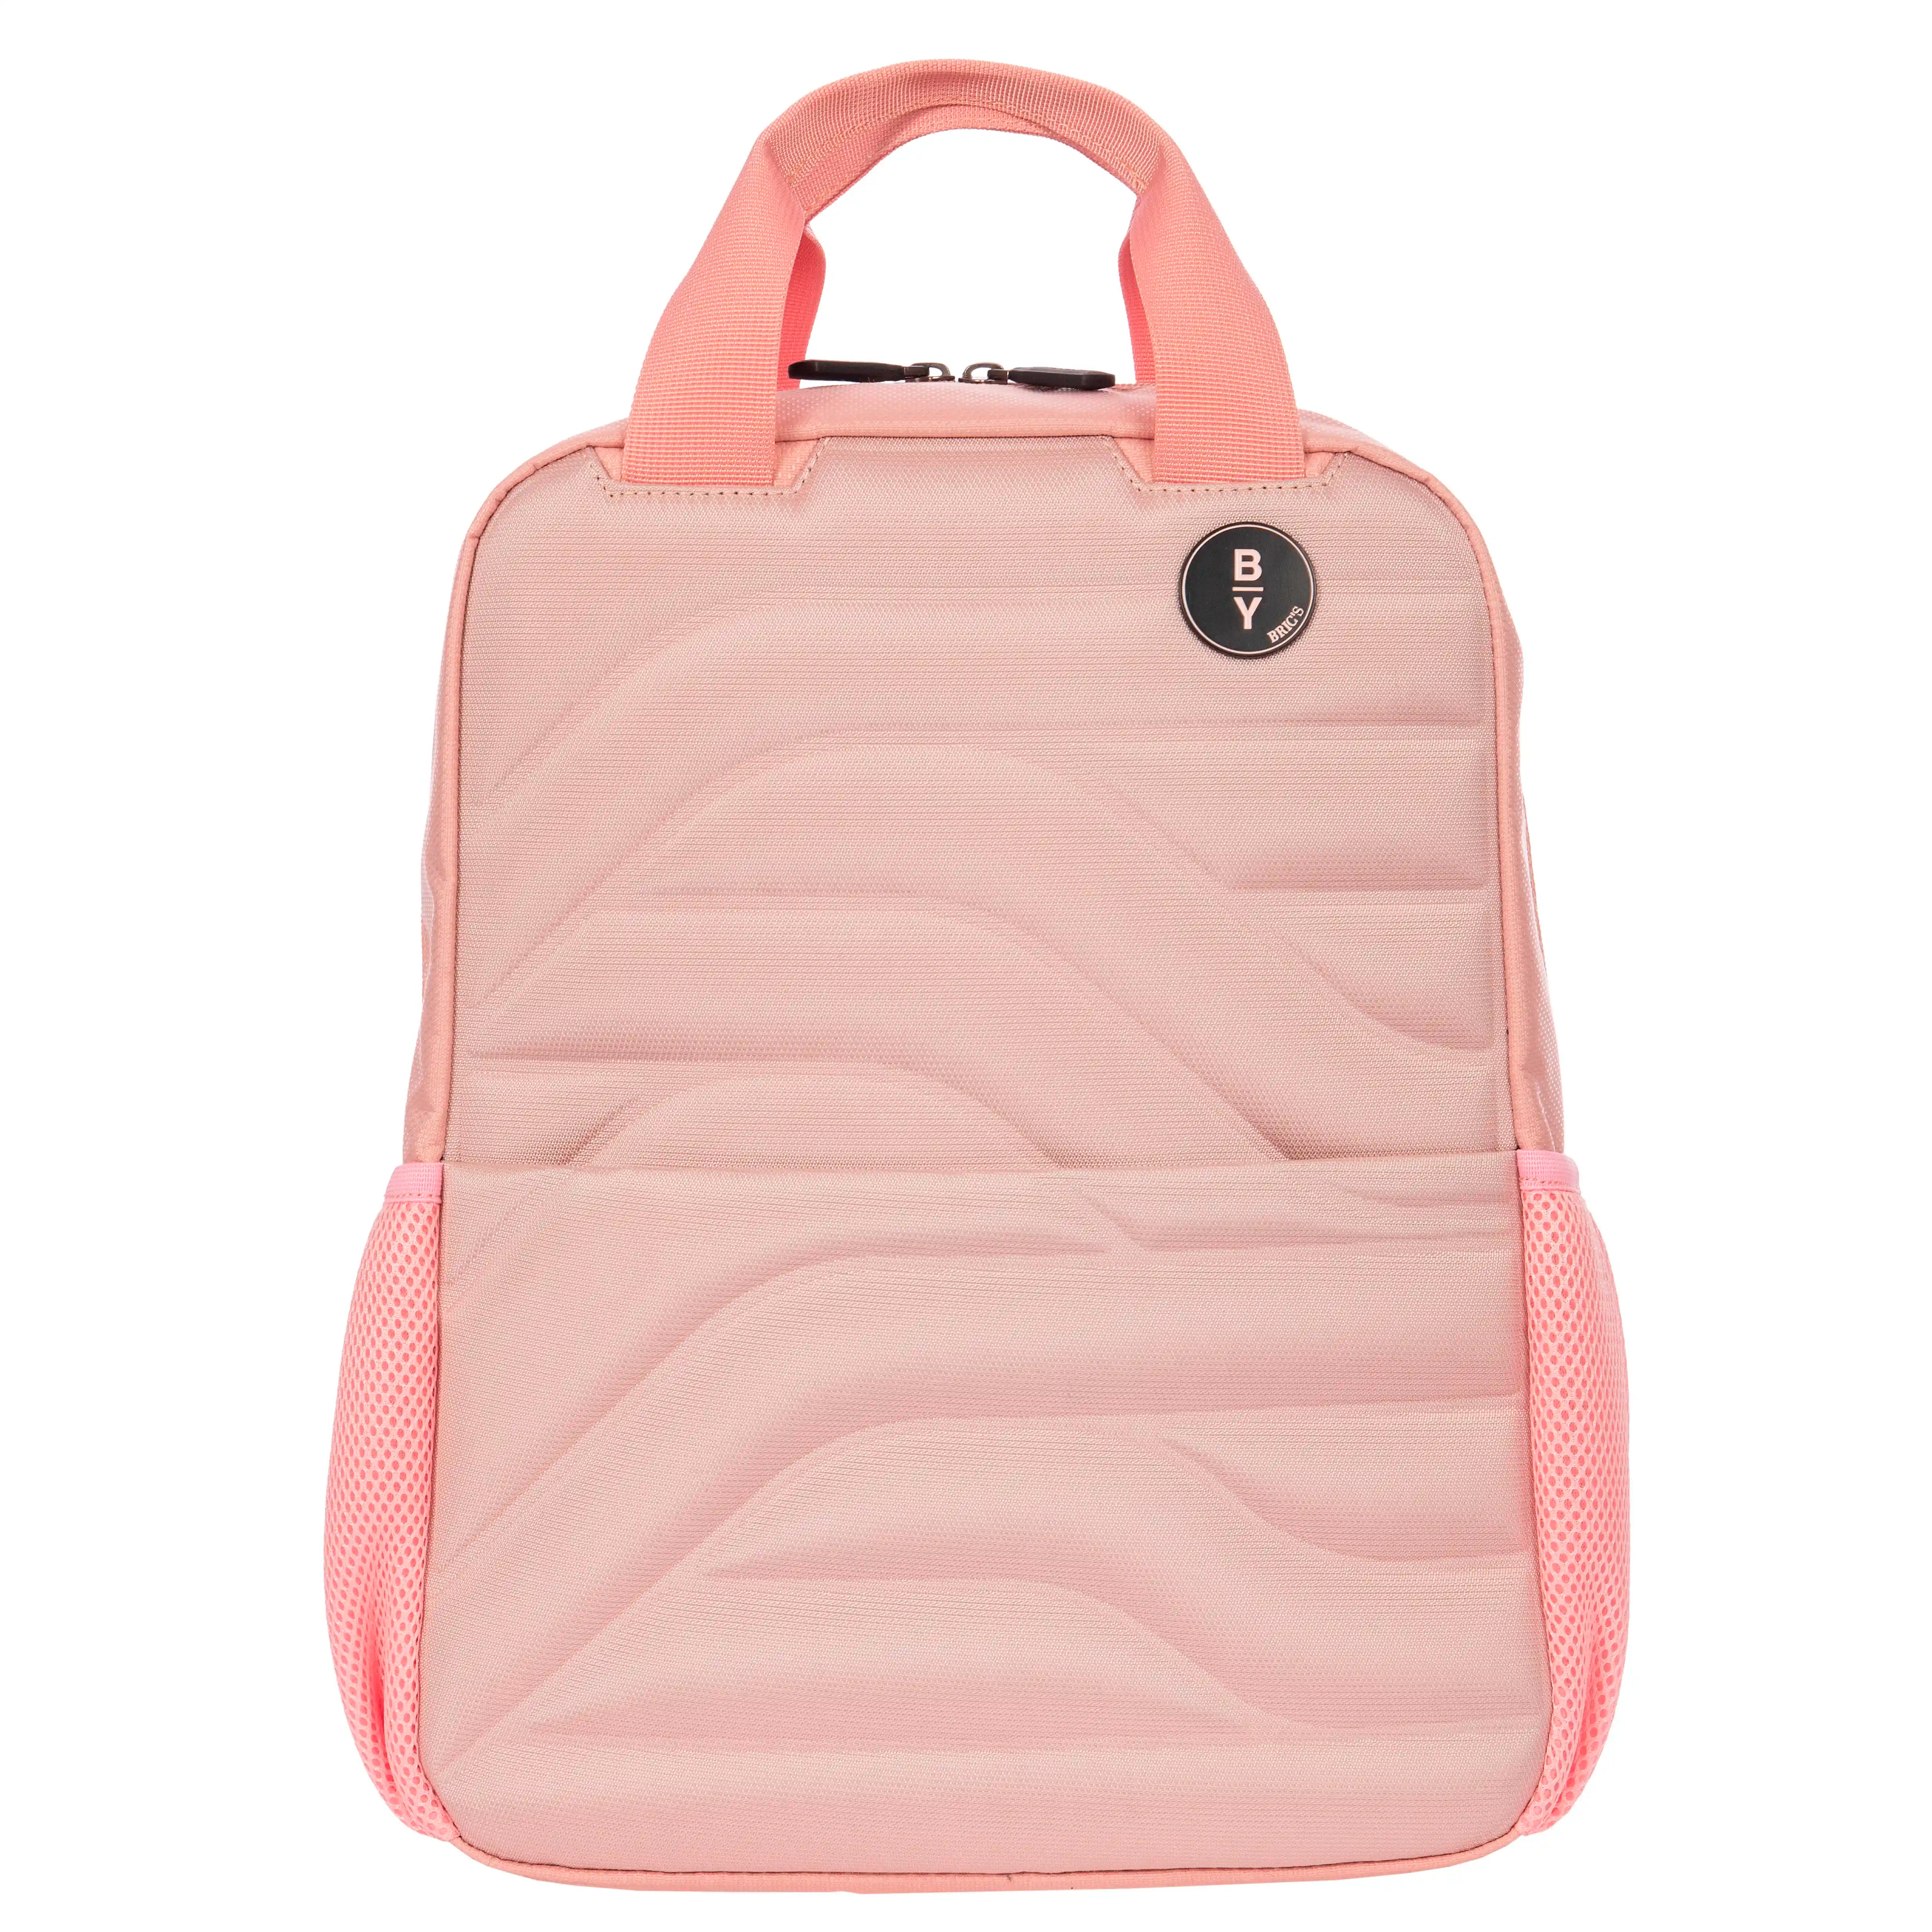 By by Brics Itaca Backpack 37 cm - Pearl Pink